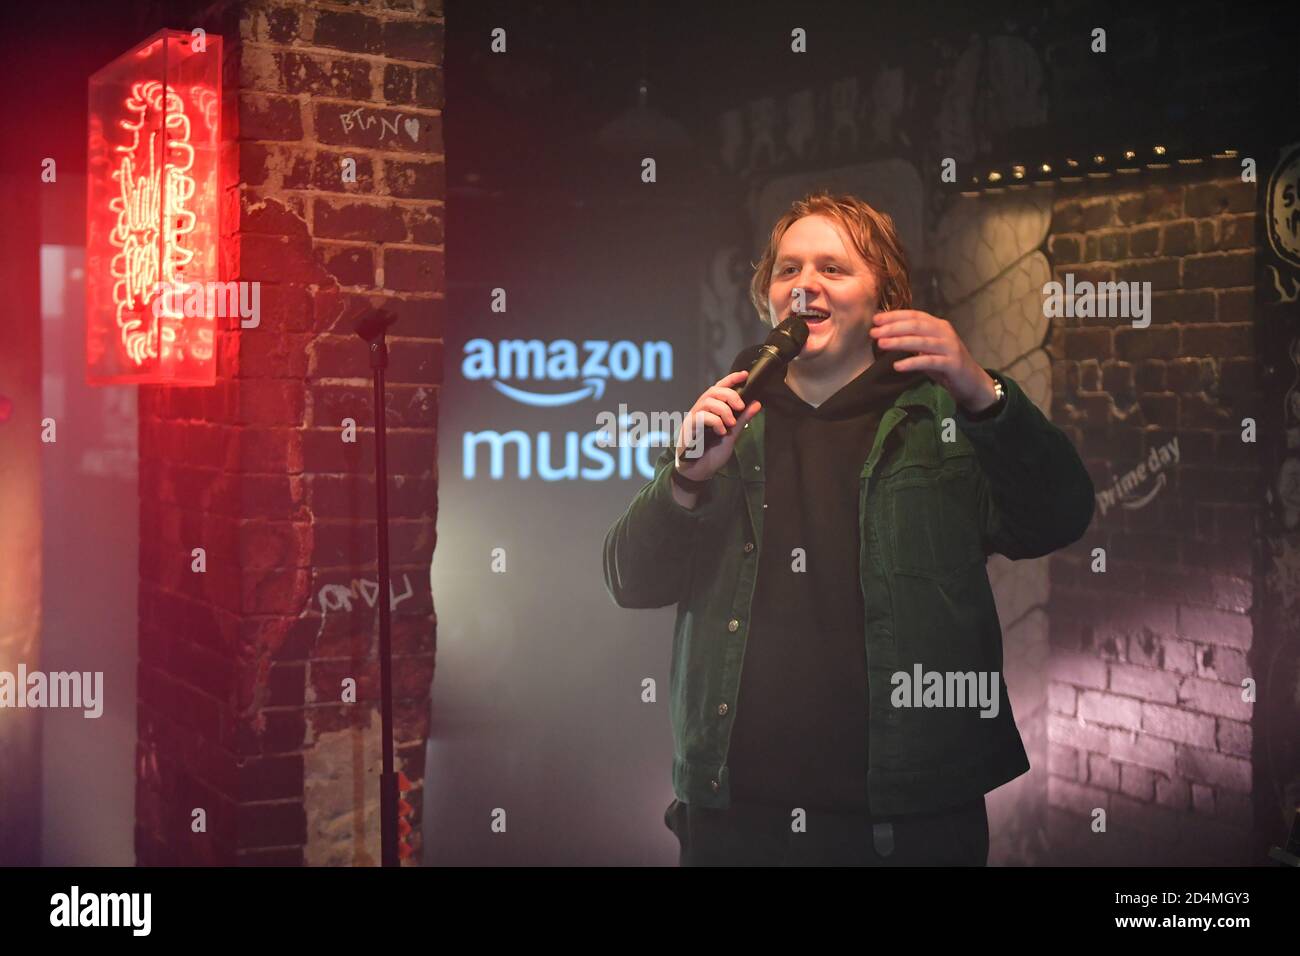 EDITORIAL USE ONLY Singer Lewis Capaldi performs at Sneaky PeteÕs in Edinburgh for Prime Day Live - a free, livestreamed event presented by Amazon Music, in support of Music Venue Trust to raise awareness and funds for UK music venues. Stock Photo